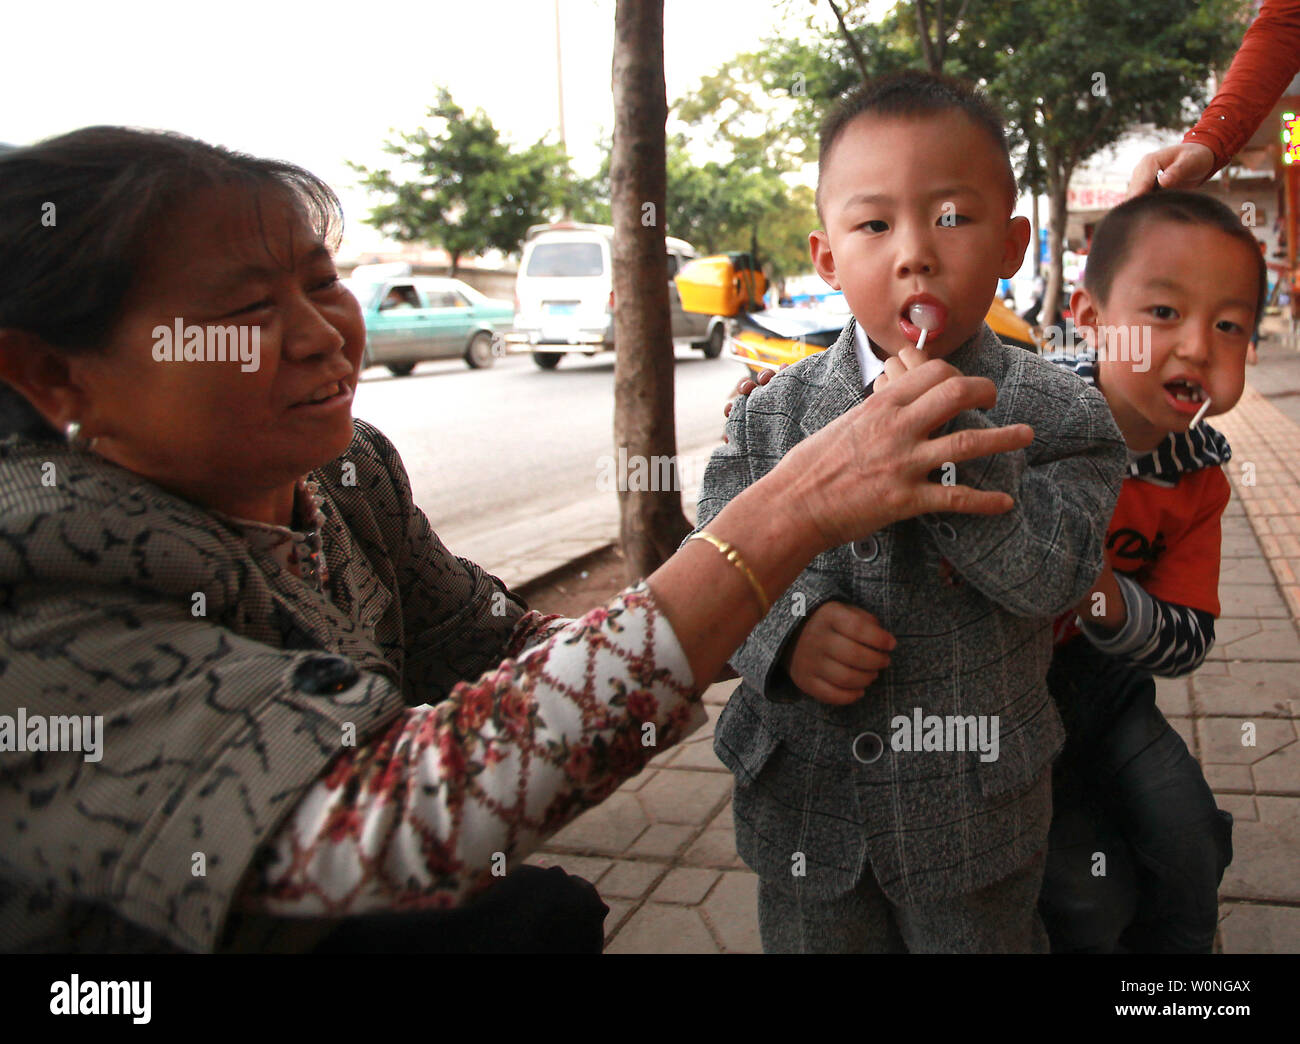 A proud grandmother of two young boys give them lollipops in Kunming, the capital of Yunnan Province, on September 21, 2012.  Due to China's controversial one-child policy and parents preference for having a boy, the country is experiencing a profound skewed sex ration - 120 males born for every 100 females.   UPI/Stephen Shaver Stock Photo